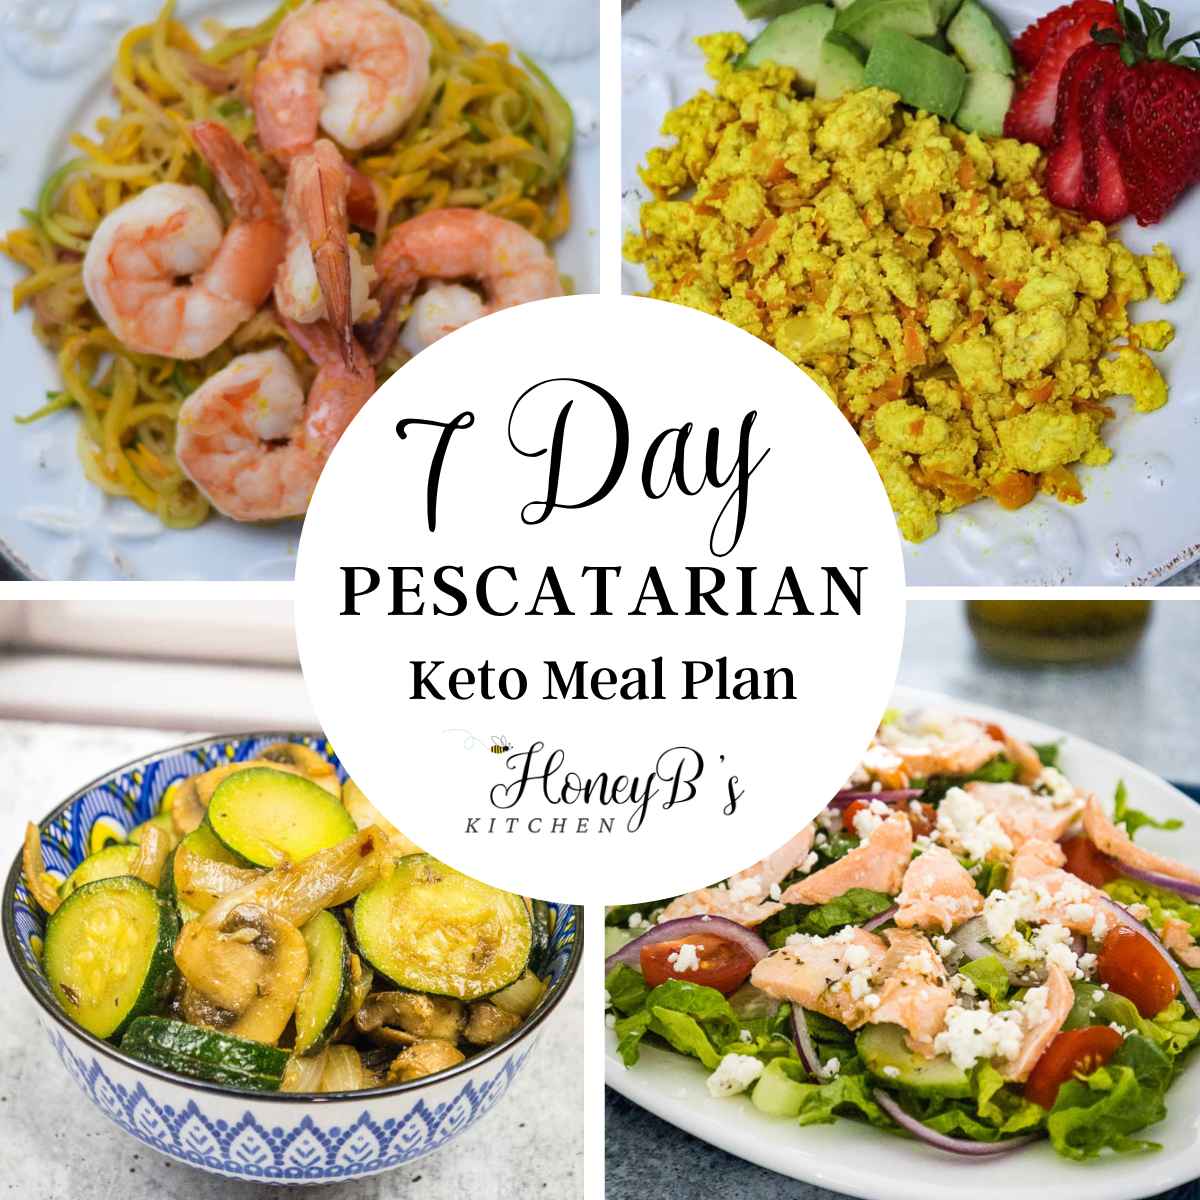 Featured image for 7 day pescatarian keto meal plan.